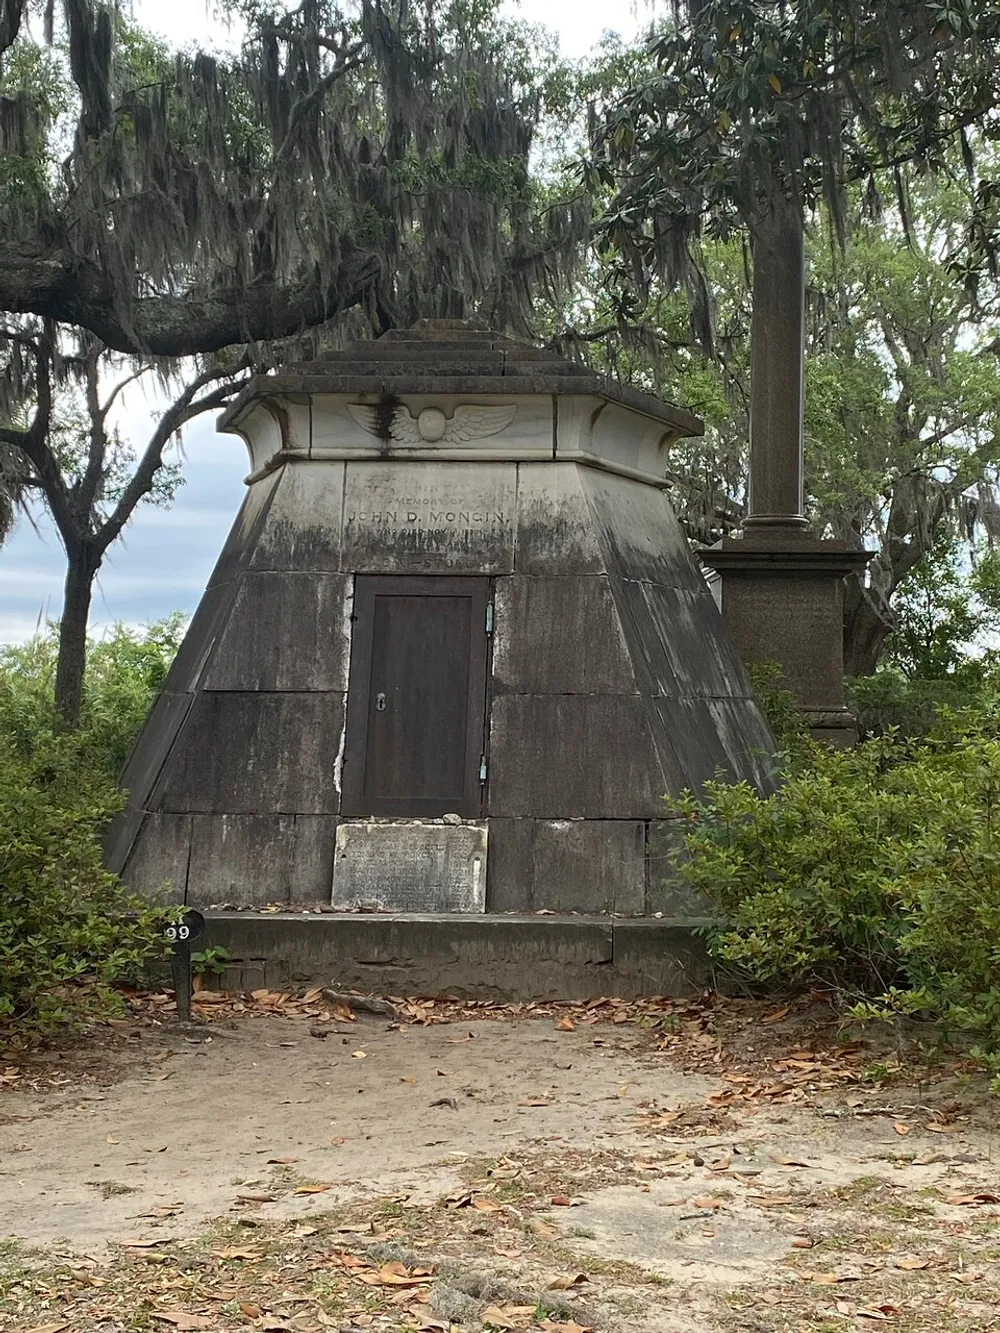 The image shows an aged weathered mausoleum with a pyramid-shaped roof set in a serene environment draped with Spanish moss hanging from surrounding trees